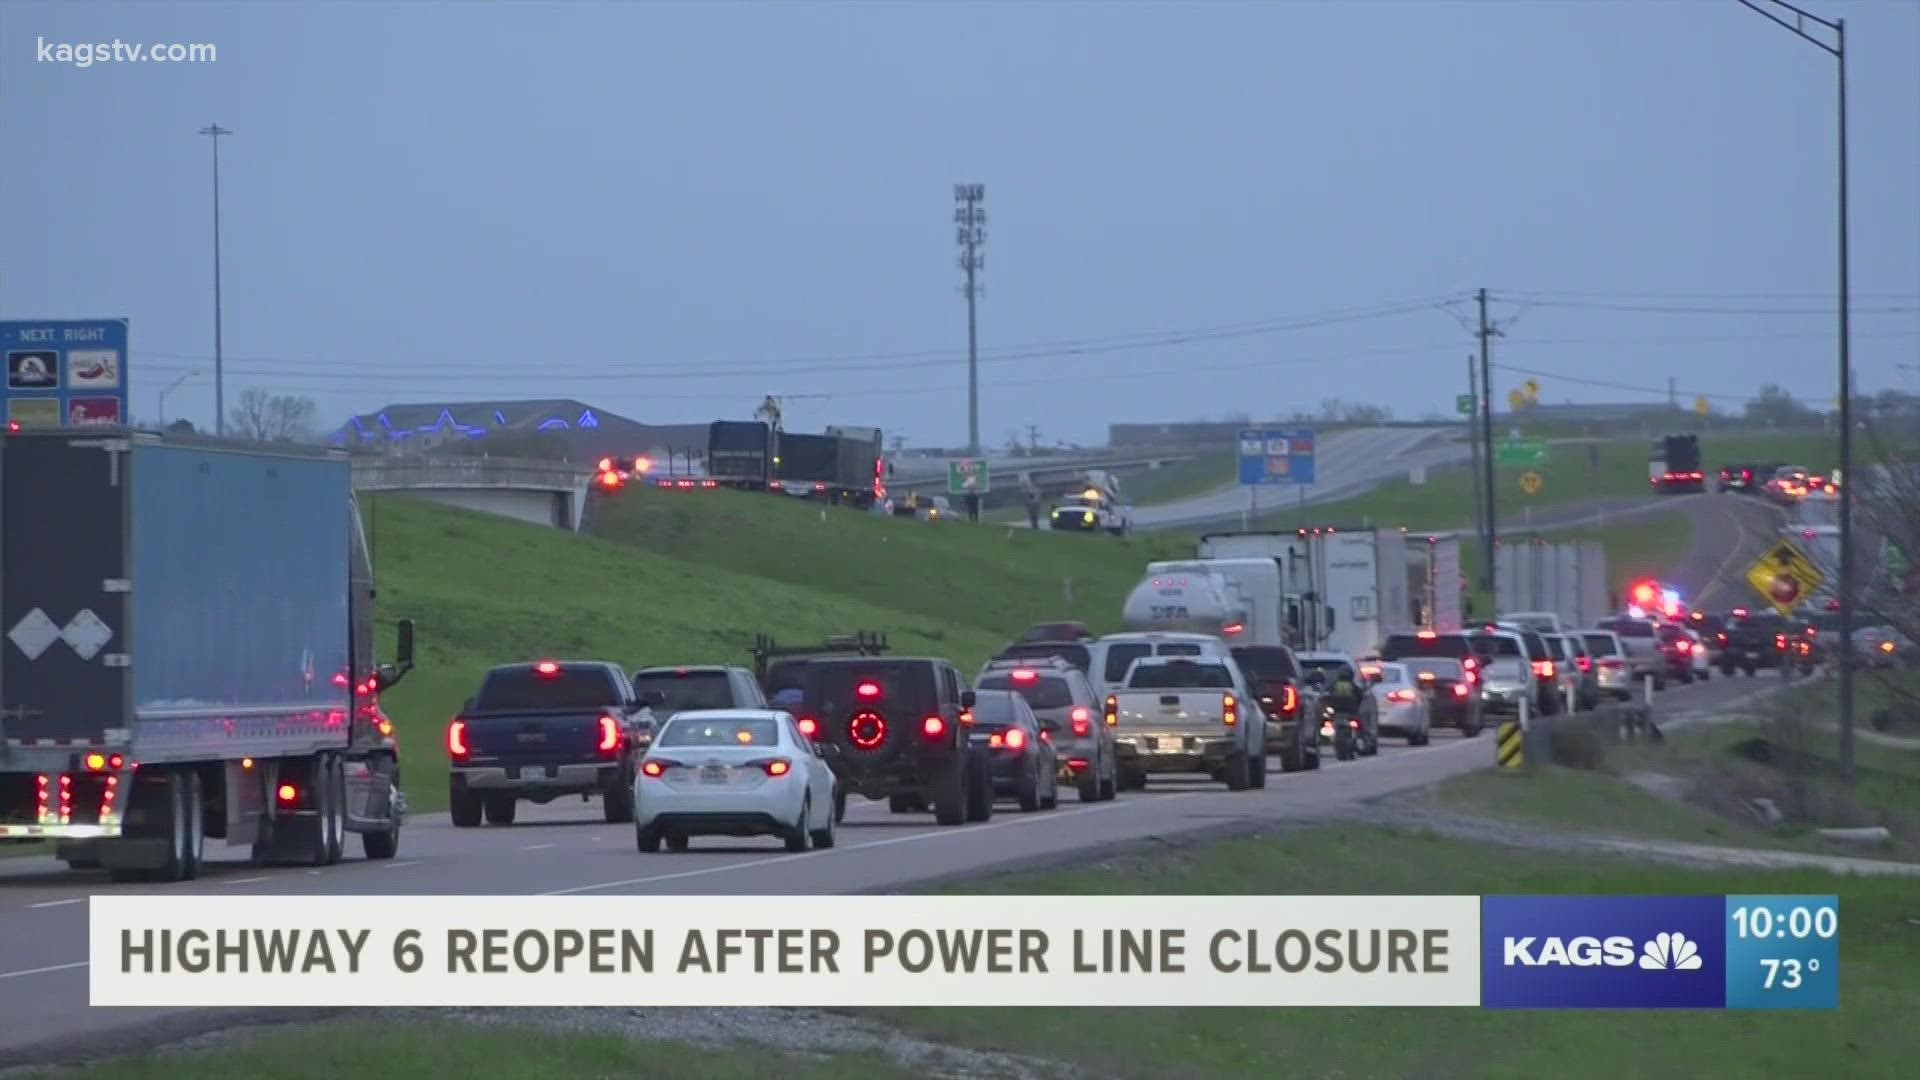 Authorities said a low hanging power line came down and the highway had to be shut down to take care of the issue.